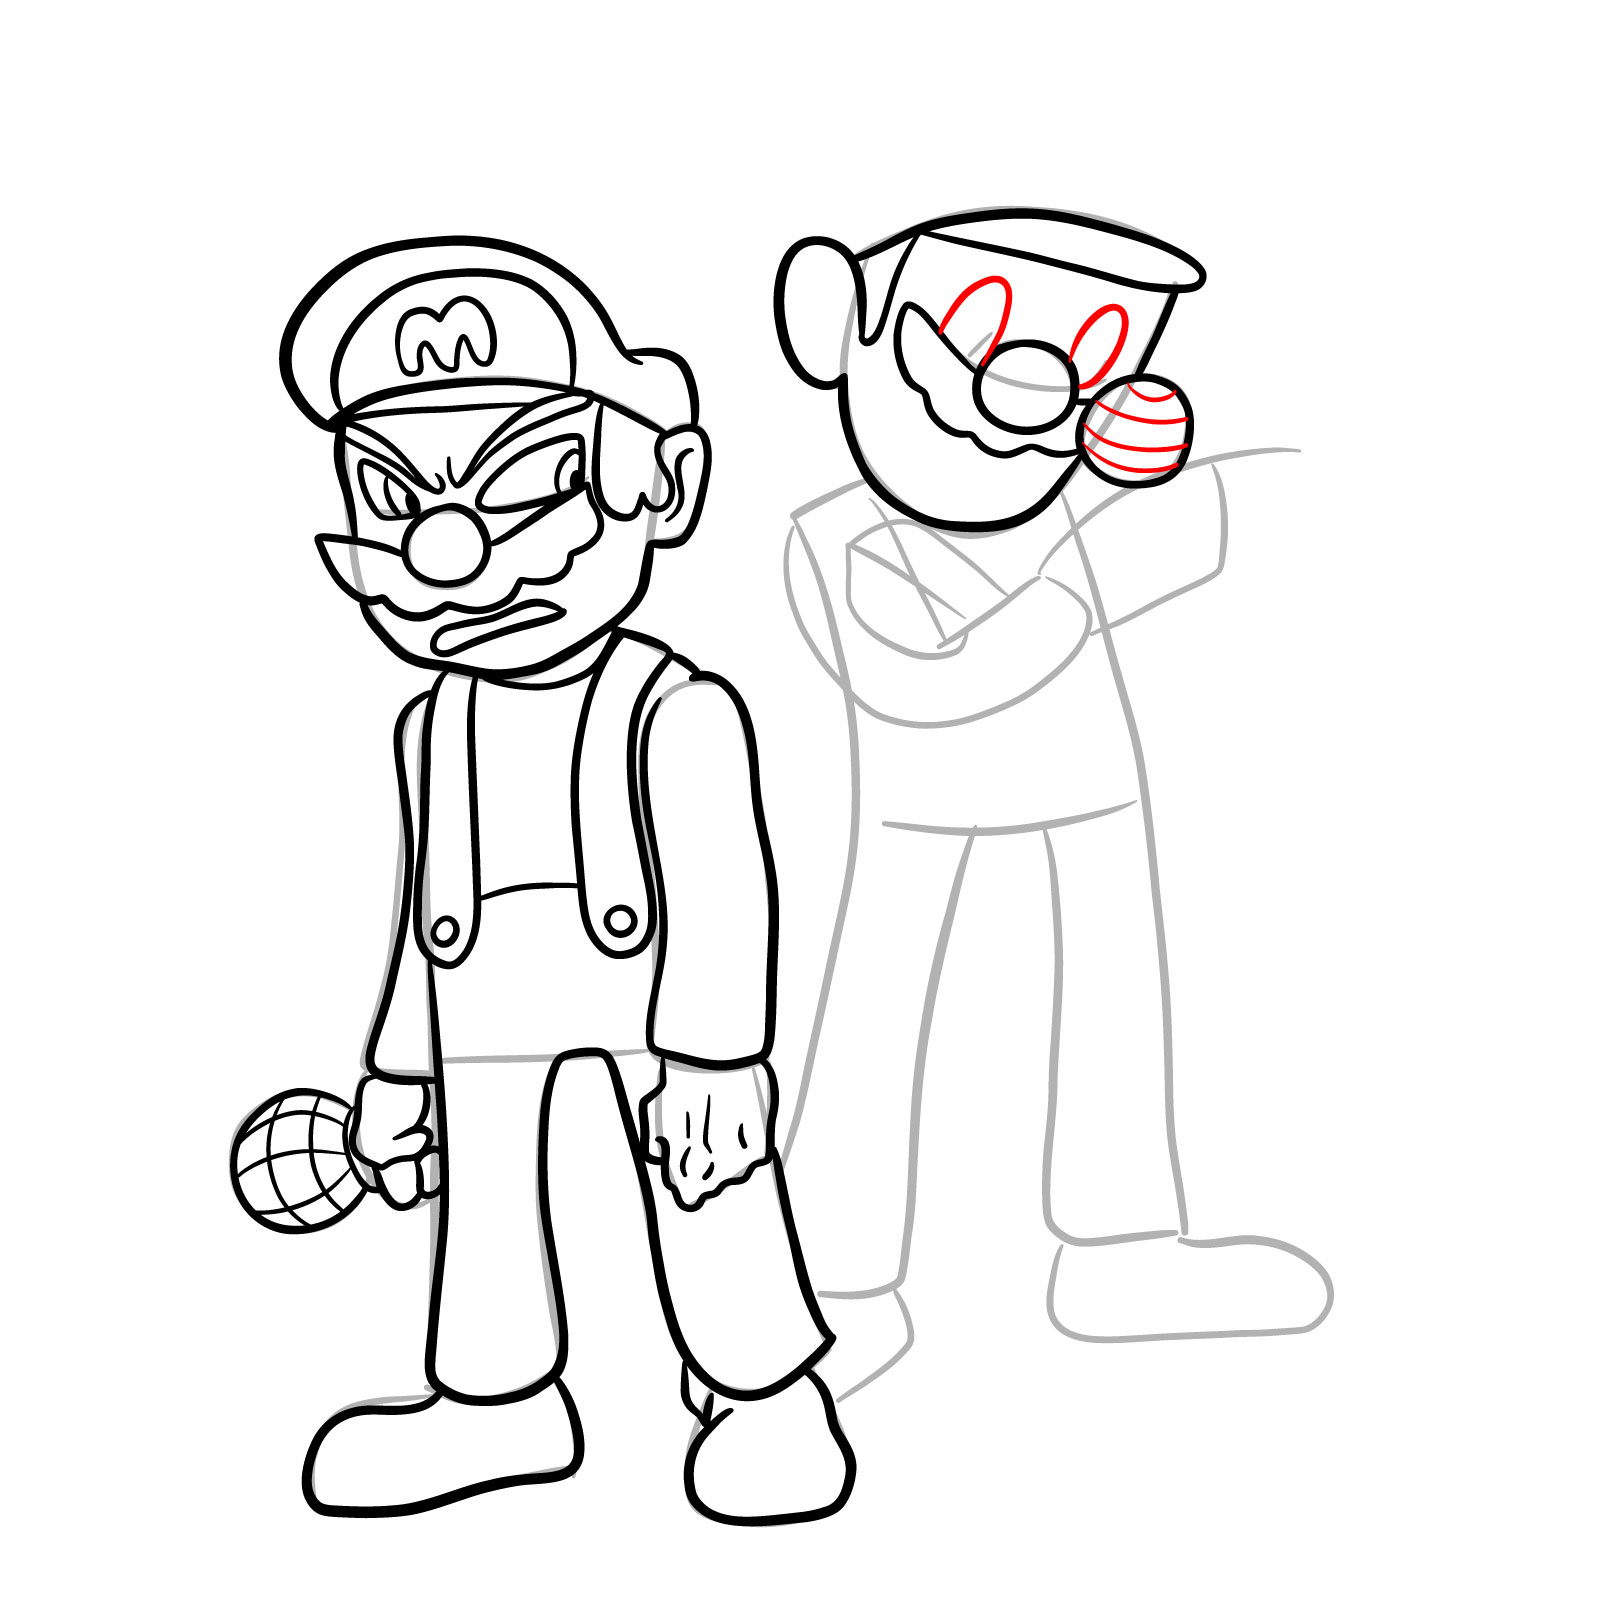 How to draw Mario and Luigi from Tails Gets Trolled - step 29